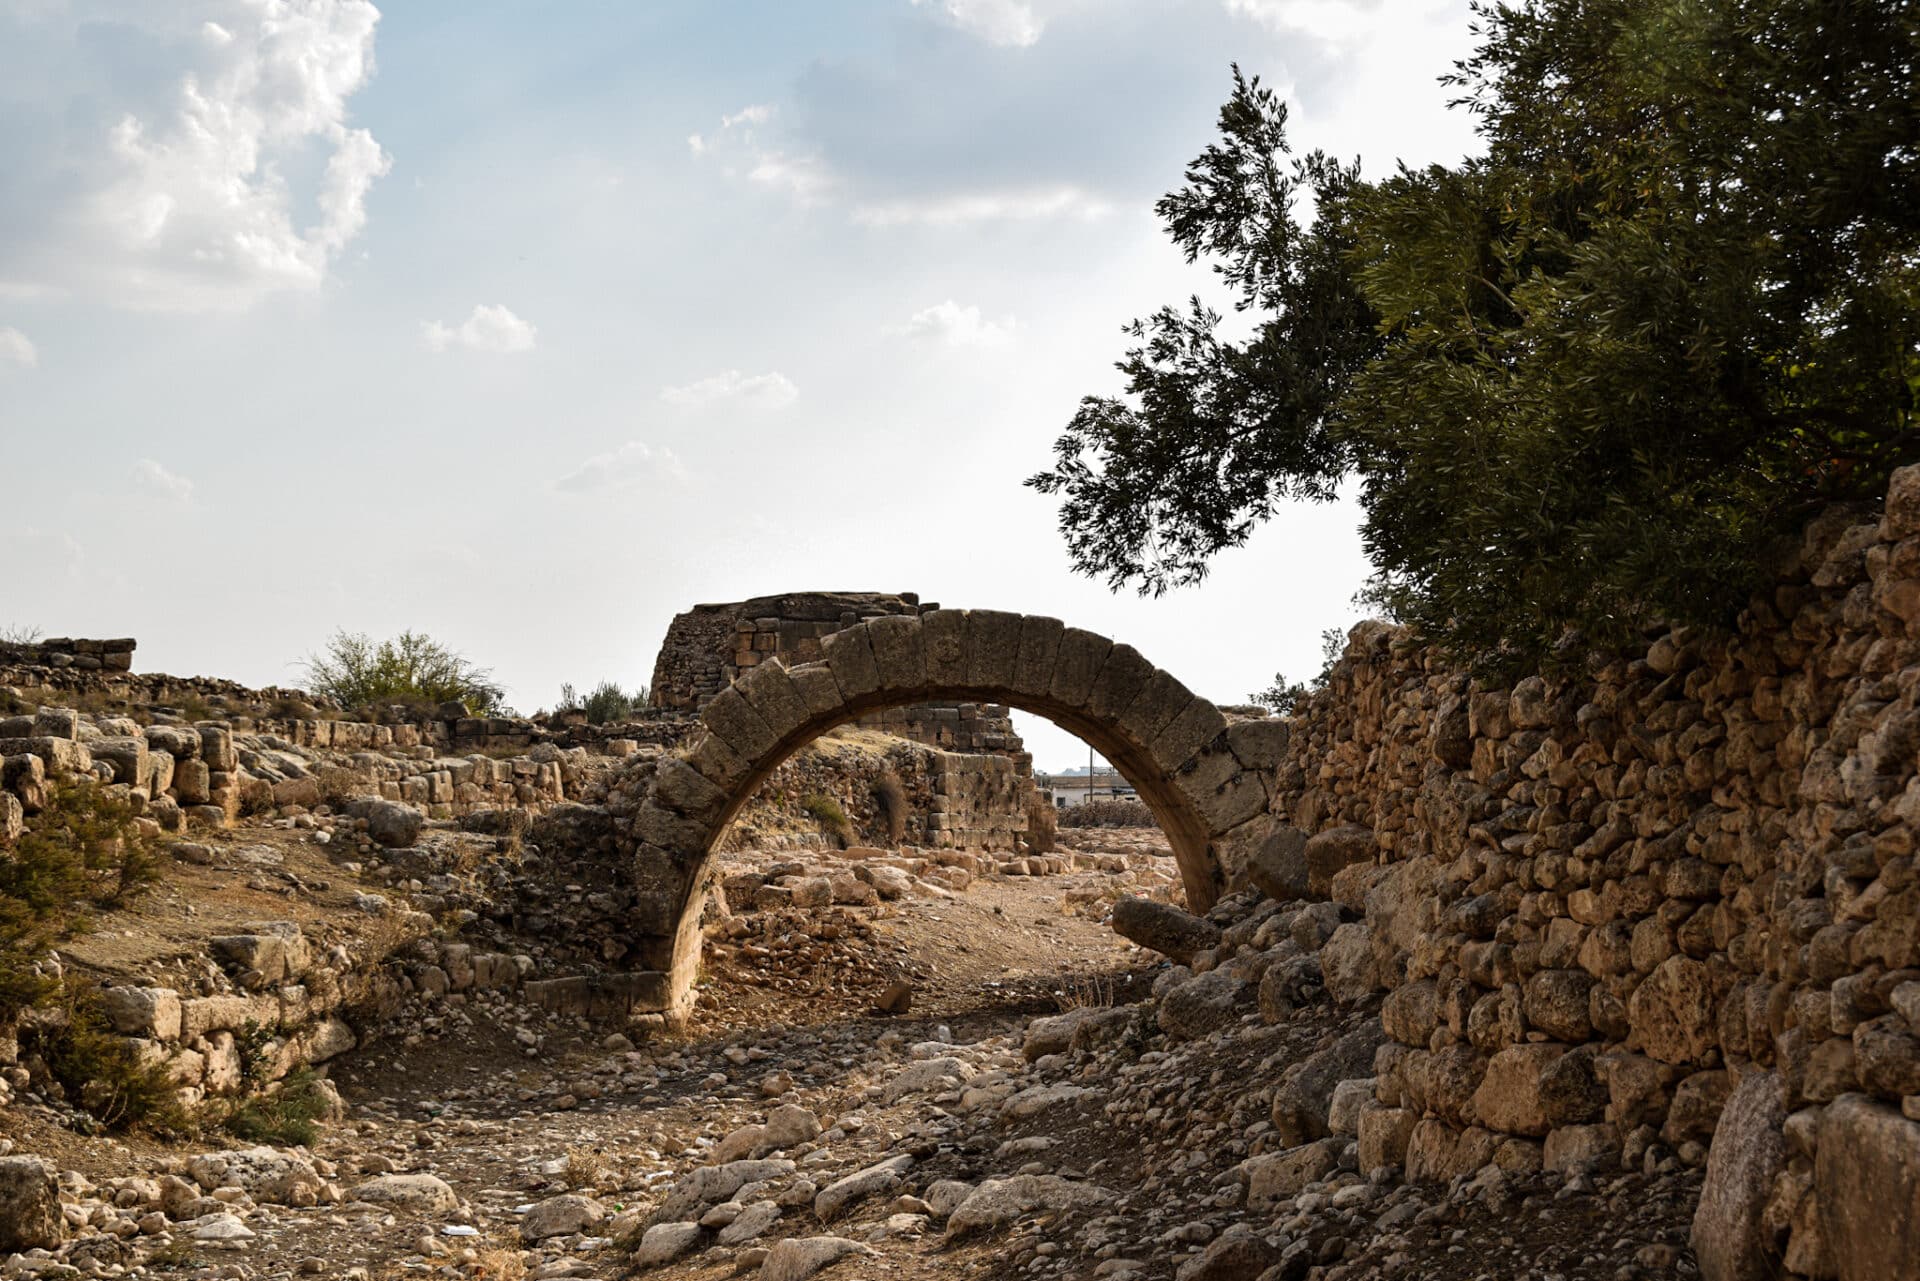 an old Roman bridge spans a dried up riverbed in the ancient city of Dara